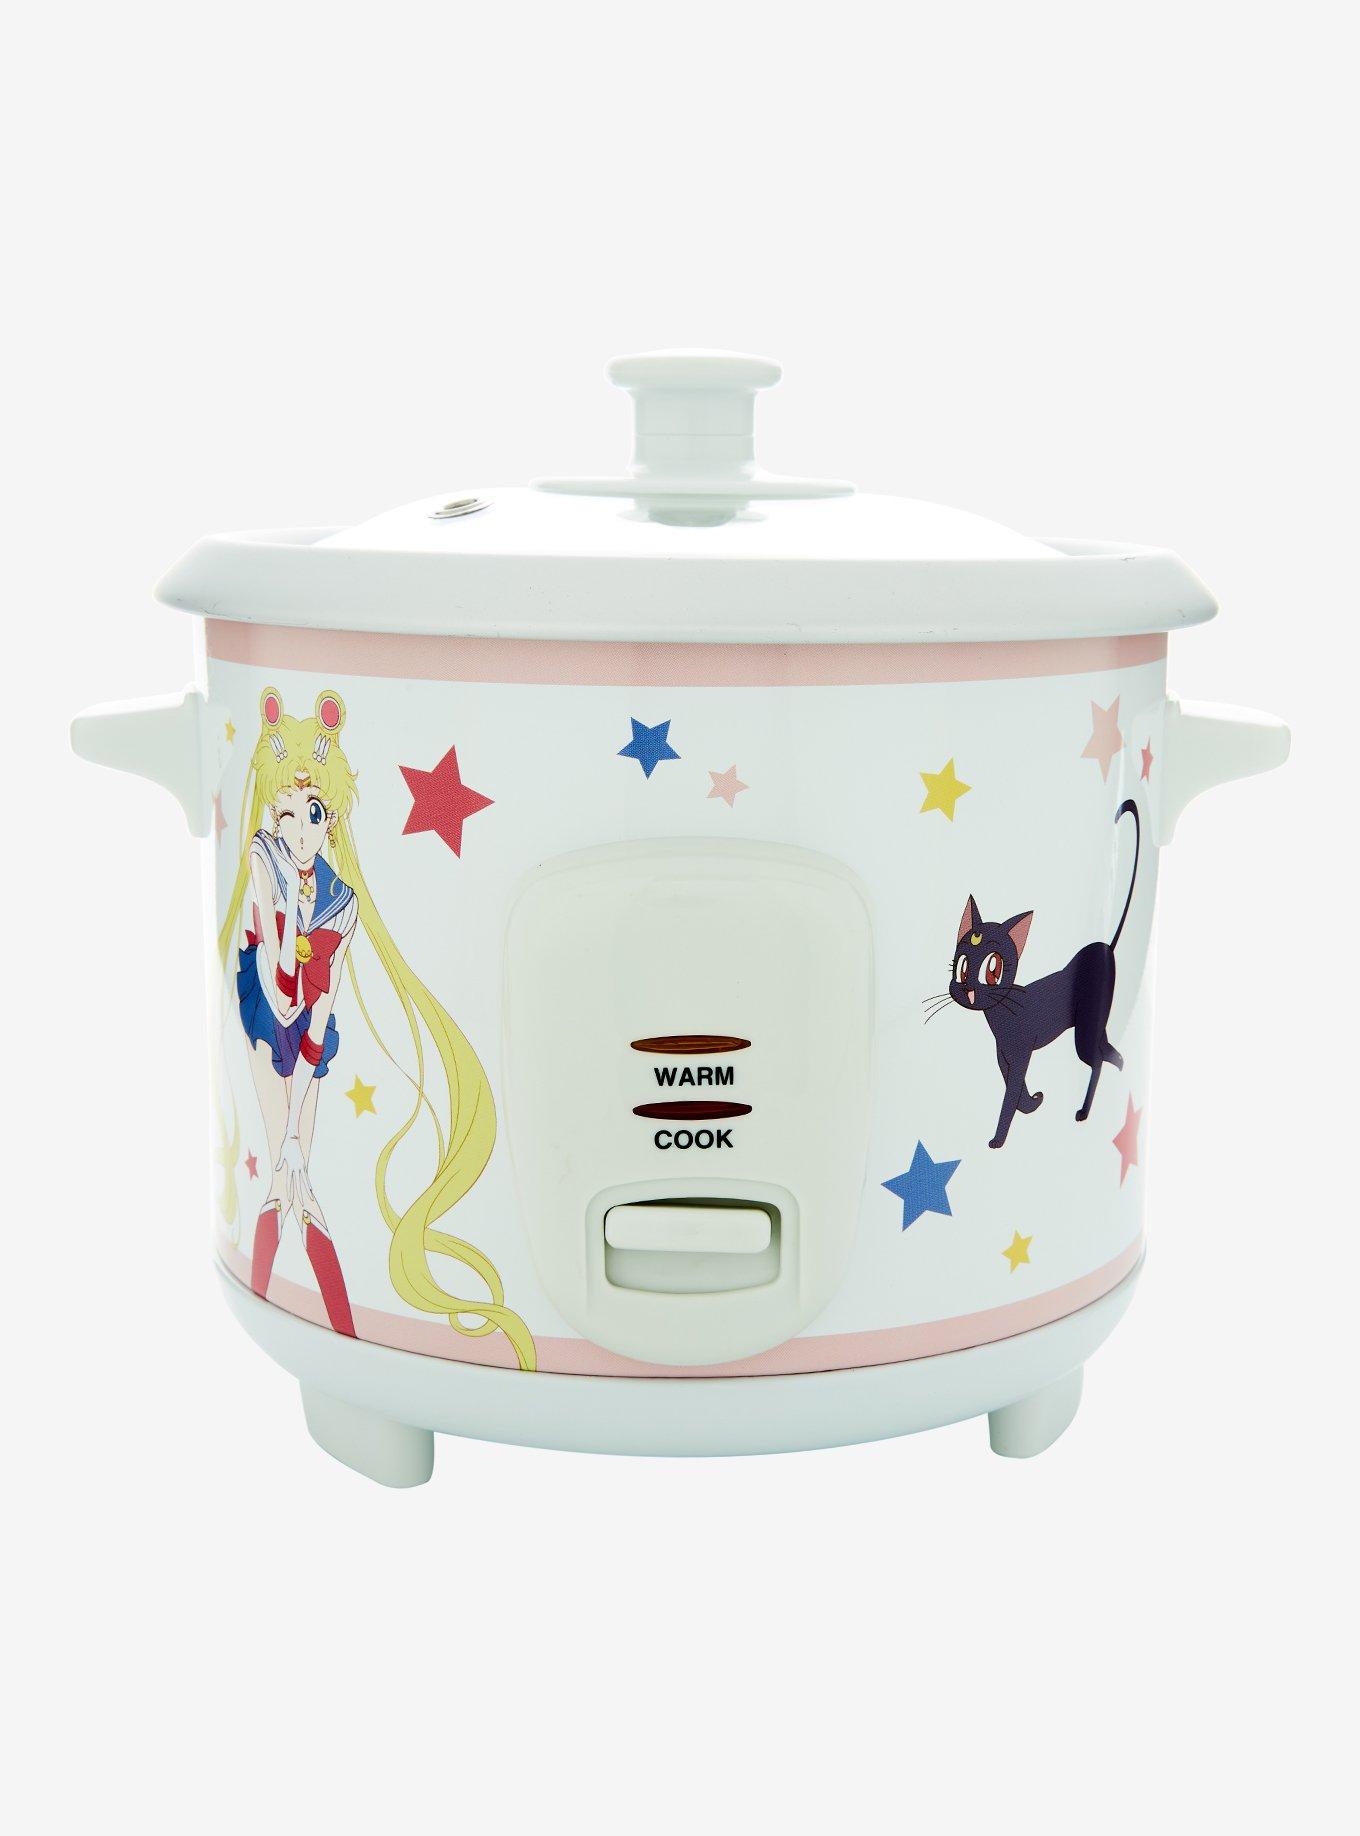 Sailor Moon Rice Cooker by Box Lunch!💖🤍 So far I like it a lot it go